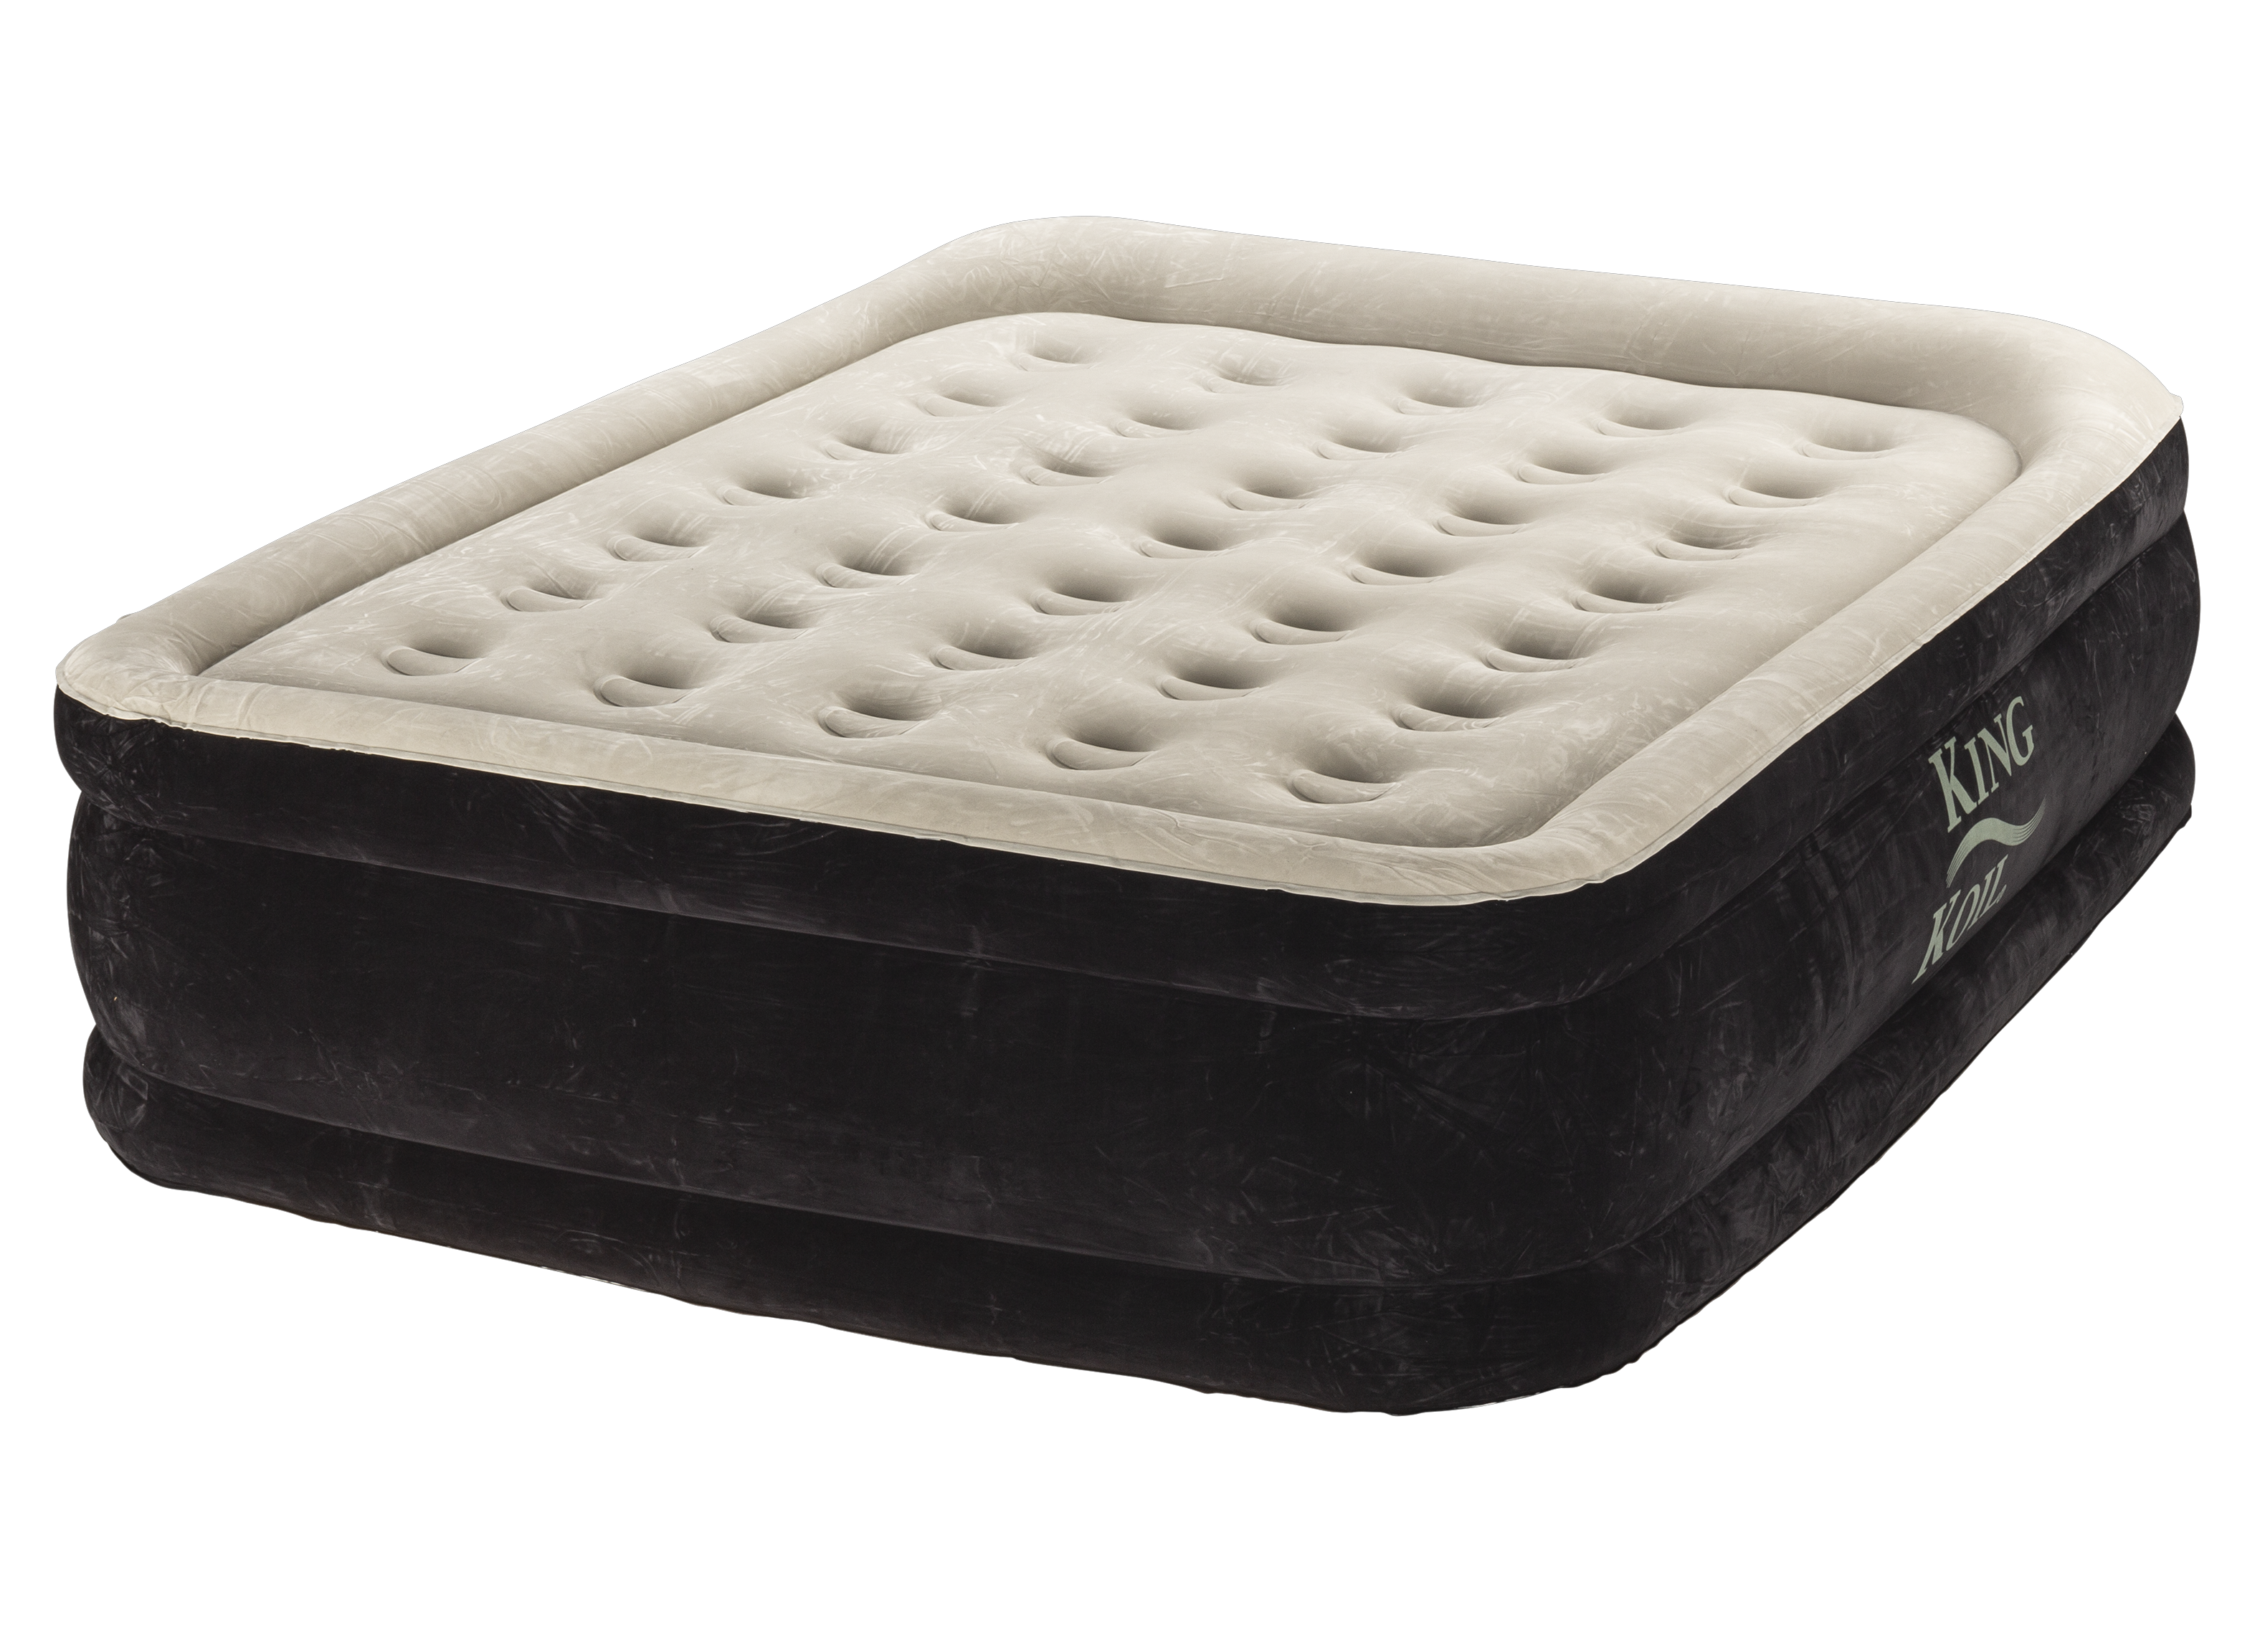 https://crdms.images.consumerreports.org/prod/products/cr/models/396972-air-mattresses-king-koil-luxury-air-mattress-10001232.png